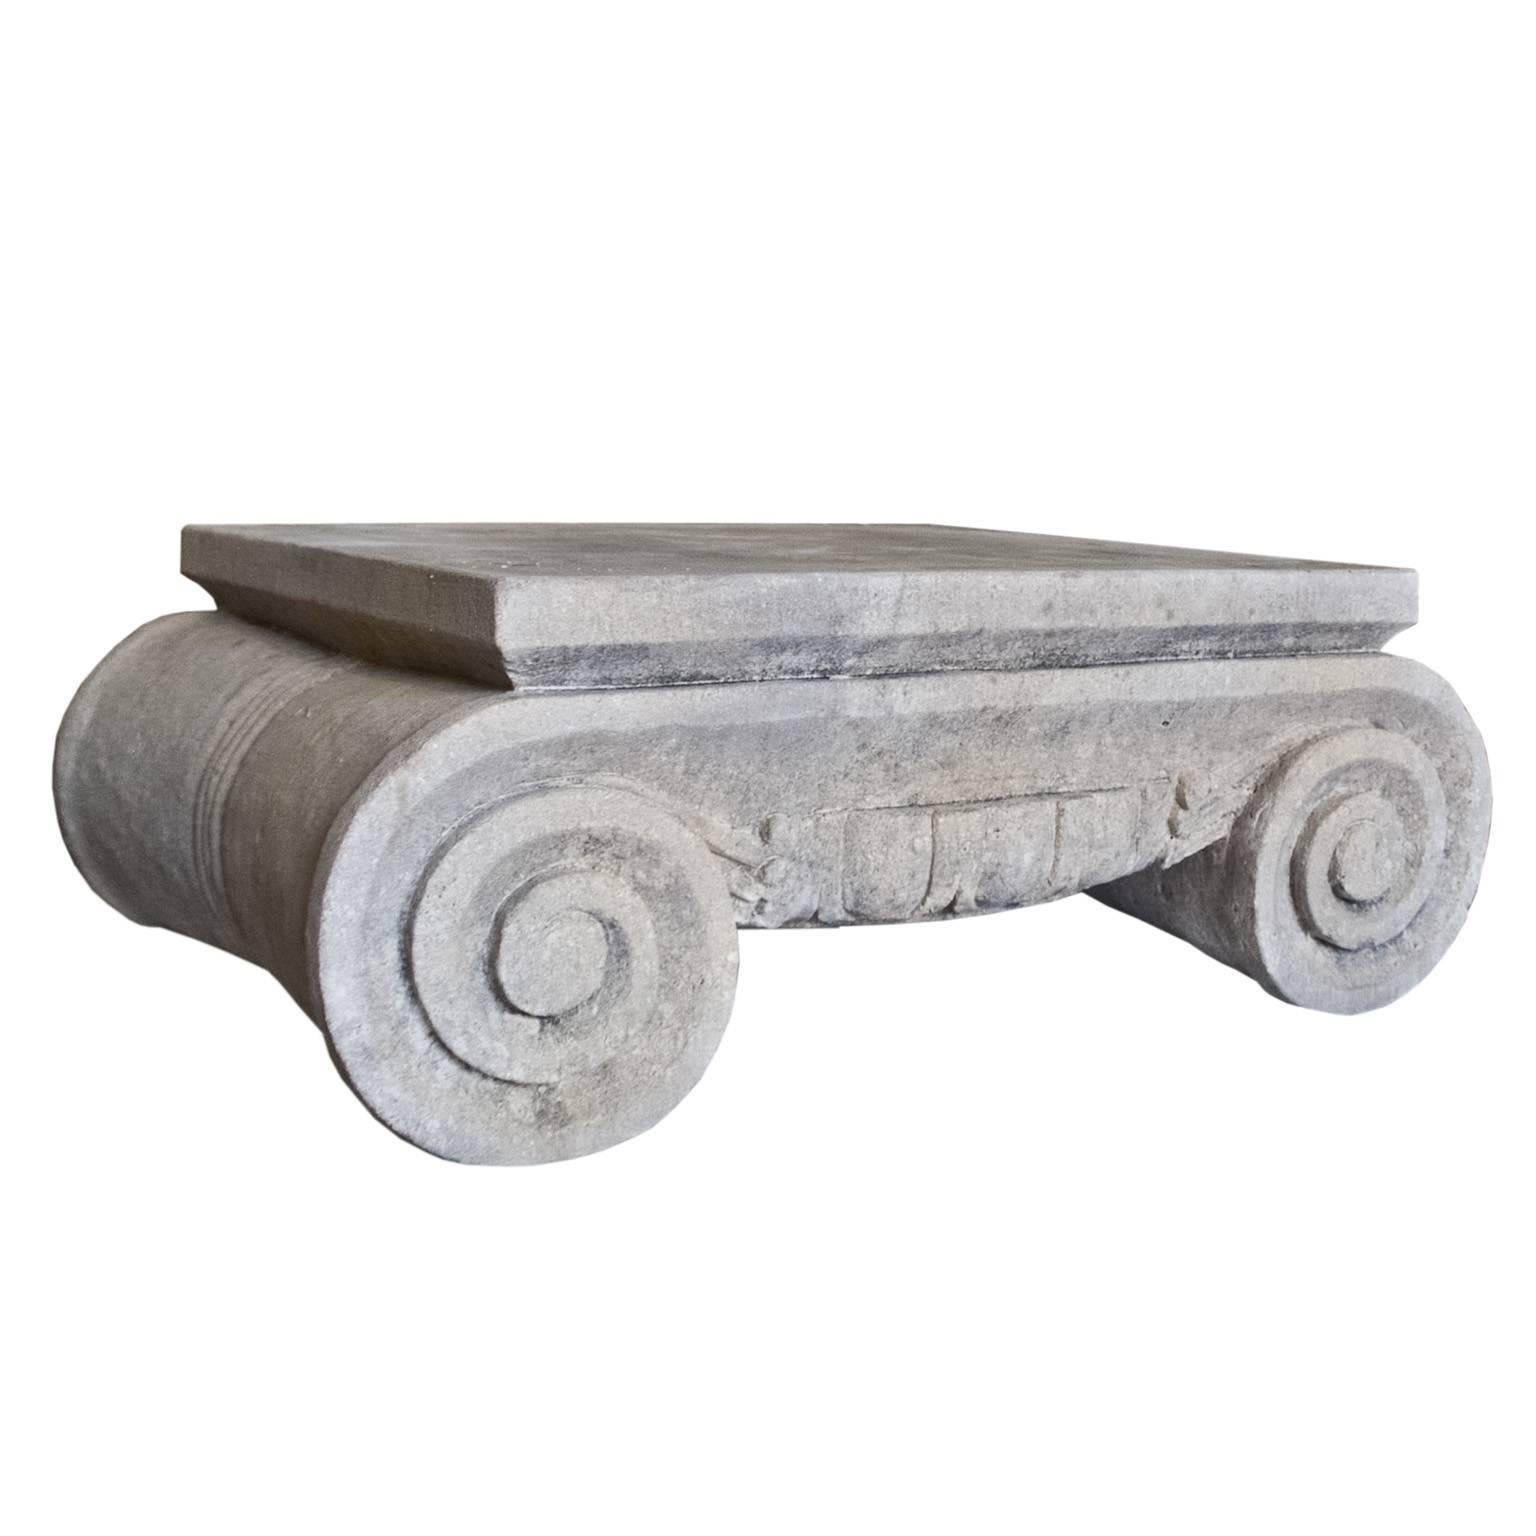 Late 19th century coffee table in the Ionic Capitol style hand-carved in limestone, Italy.
 